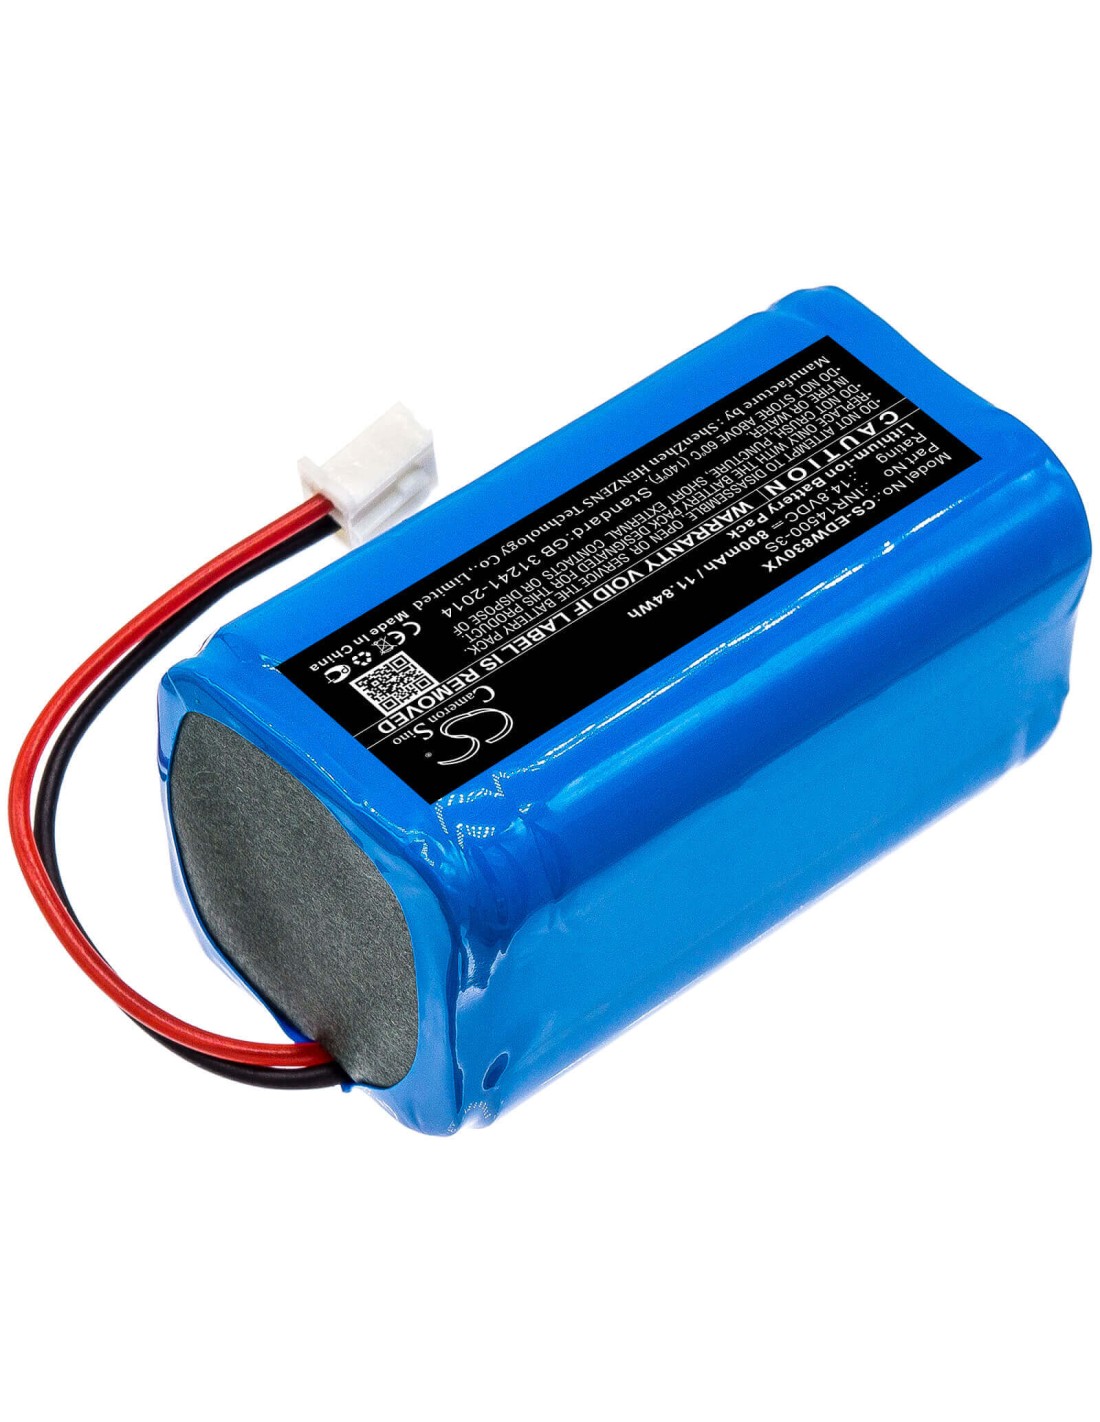 Battery for Ecovacs, W830, W830-rd, W830s 14.8V, 800mAh - 11.84Wh